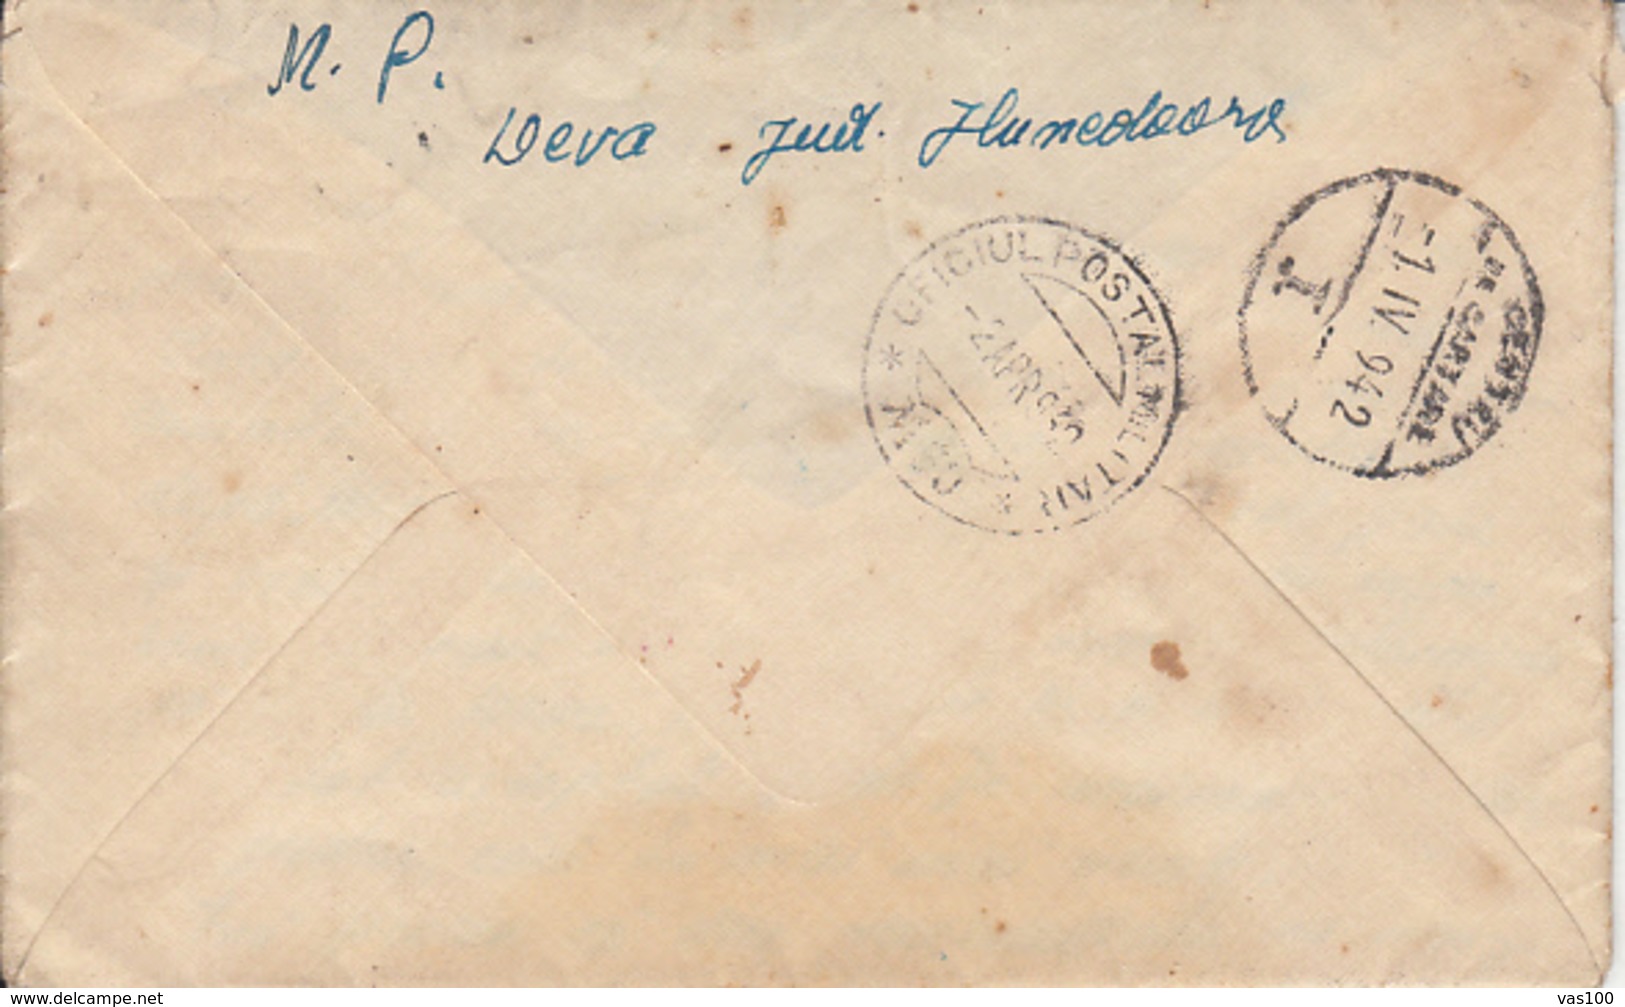 WW2 LETTER, MILITARY CENSORED, DEVA NR 23, WARFIELD POST OFFICE NR 30, 176, KING MICHAEL STAMP ON COVER, 1942, ROMANIA - World War 2 Letters